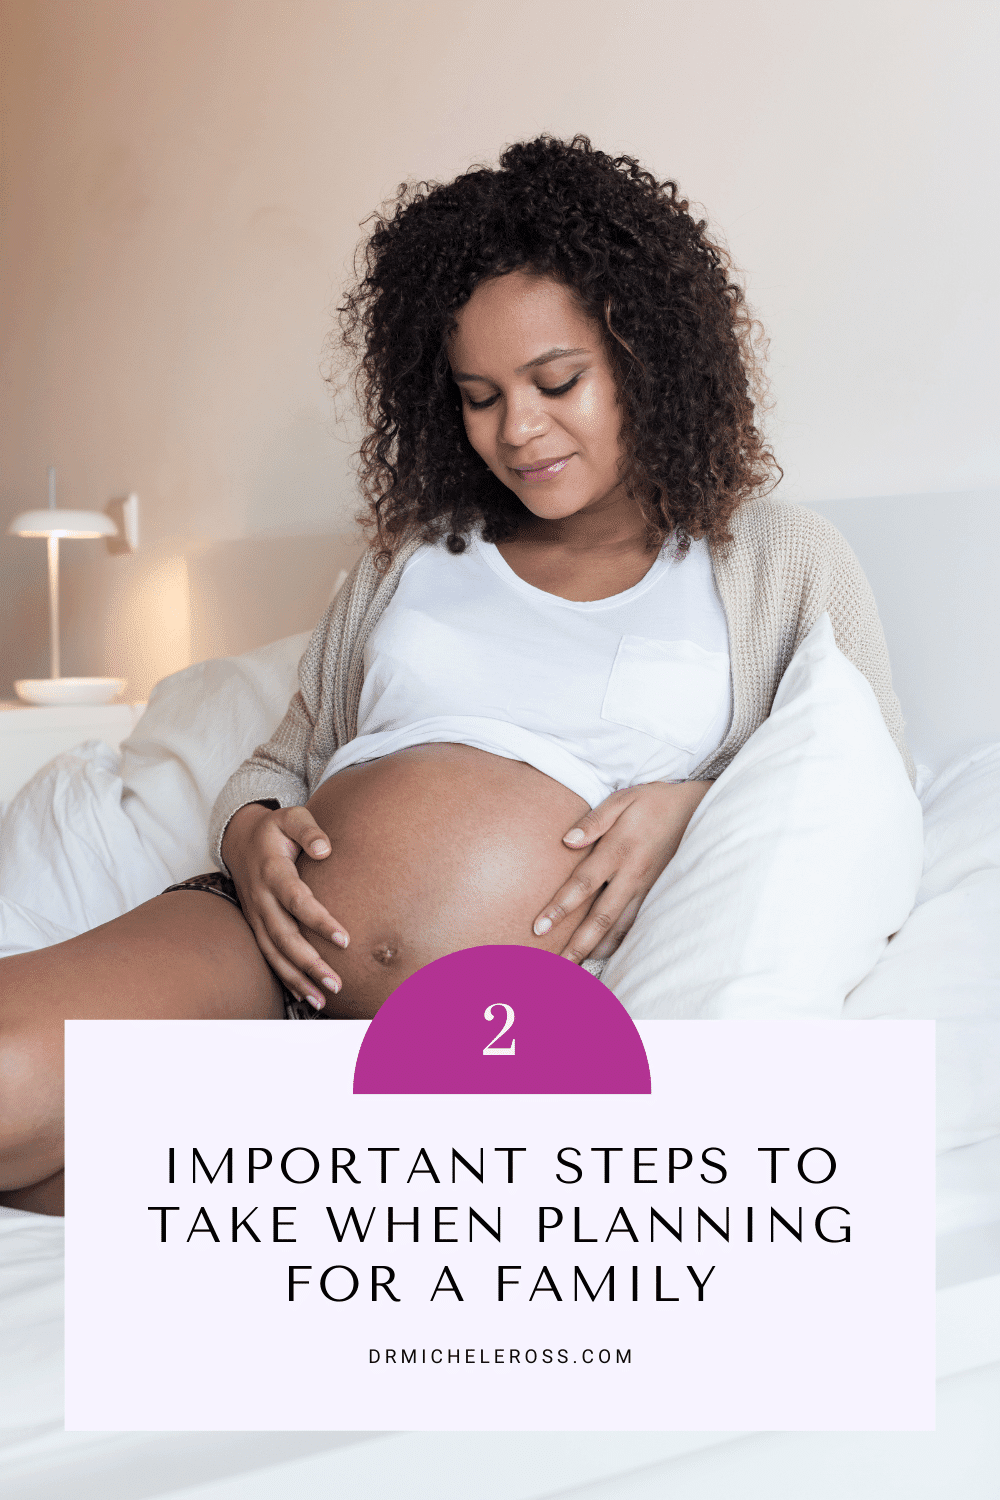 2 Important Steps To Take When Planning For a Family